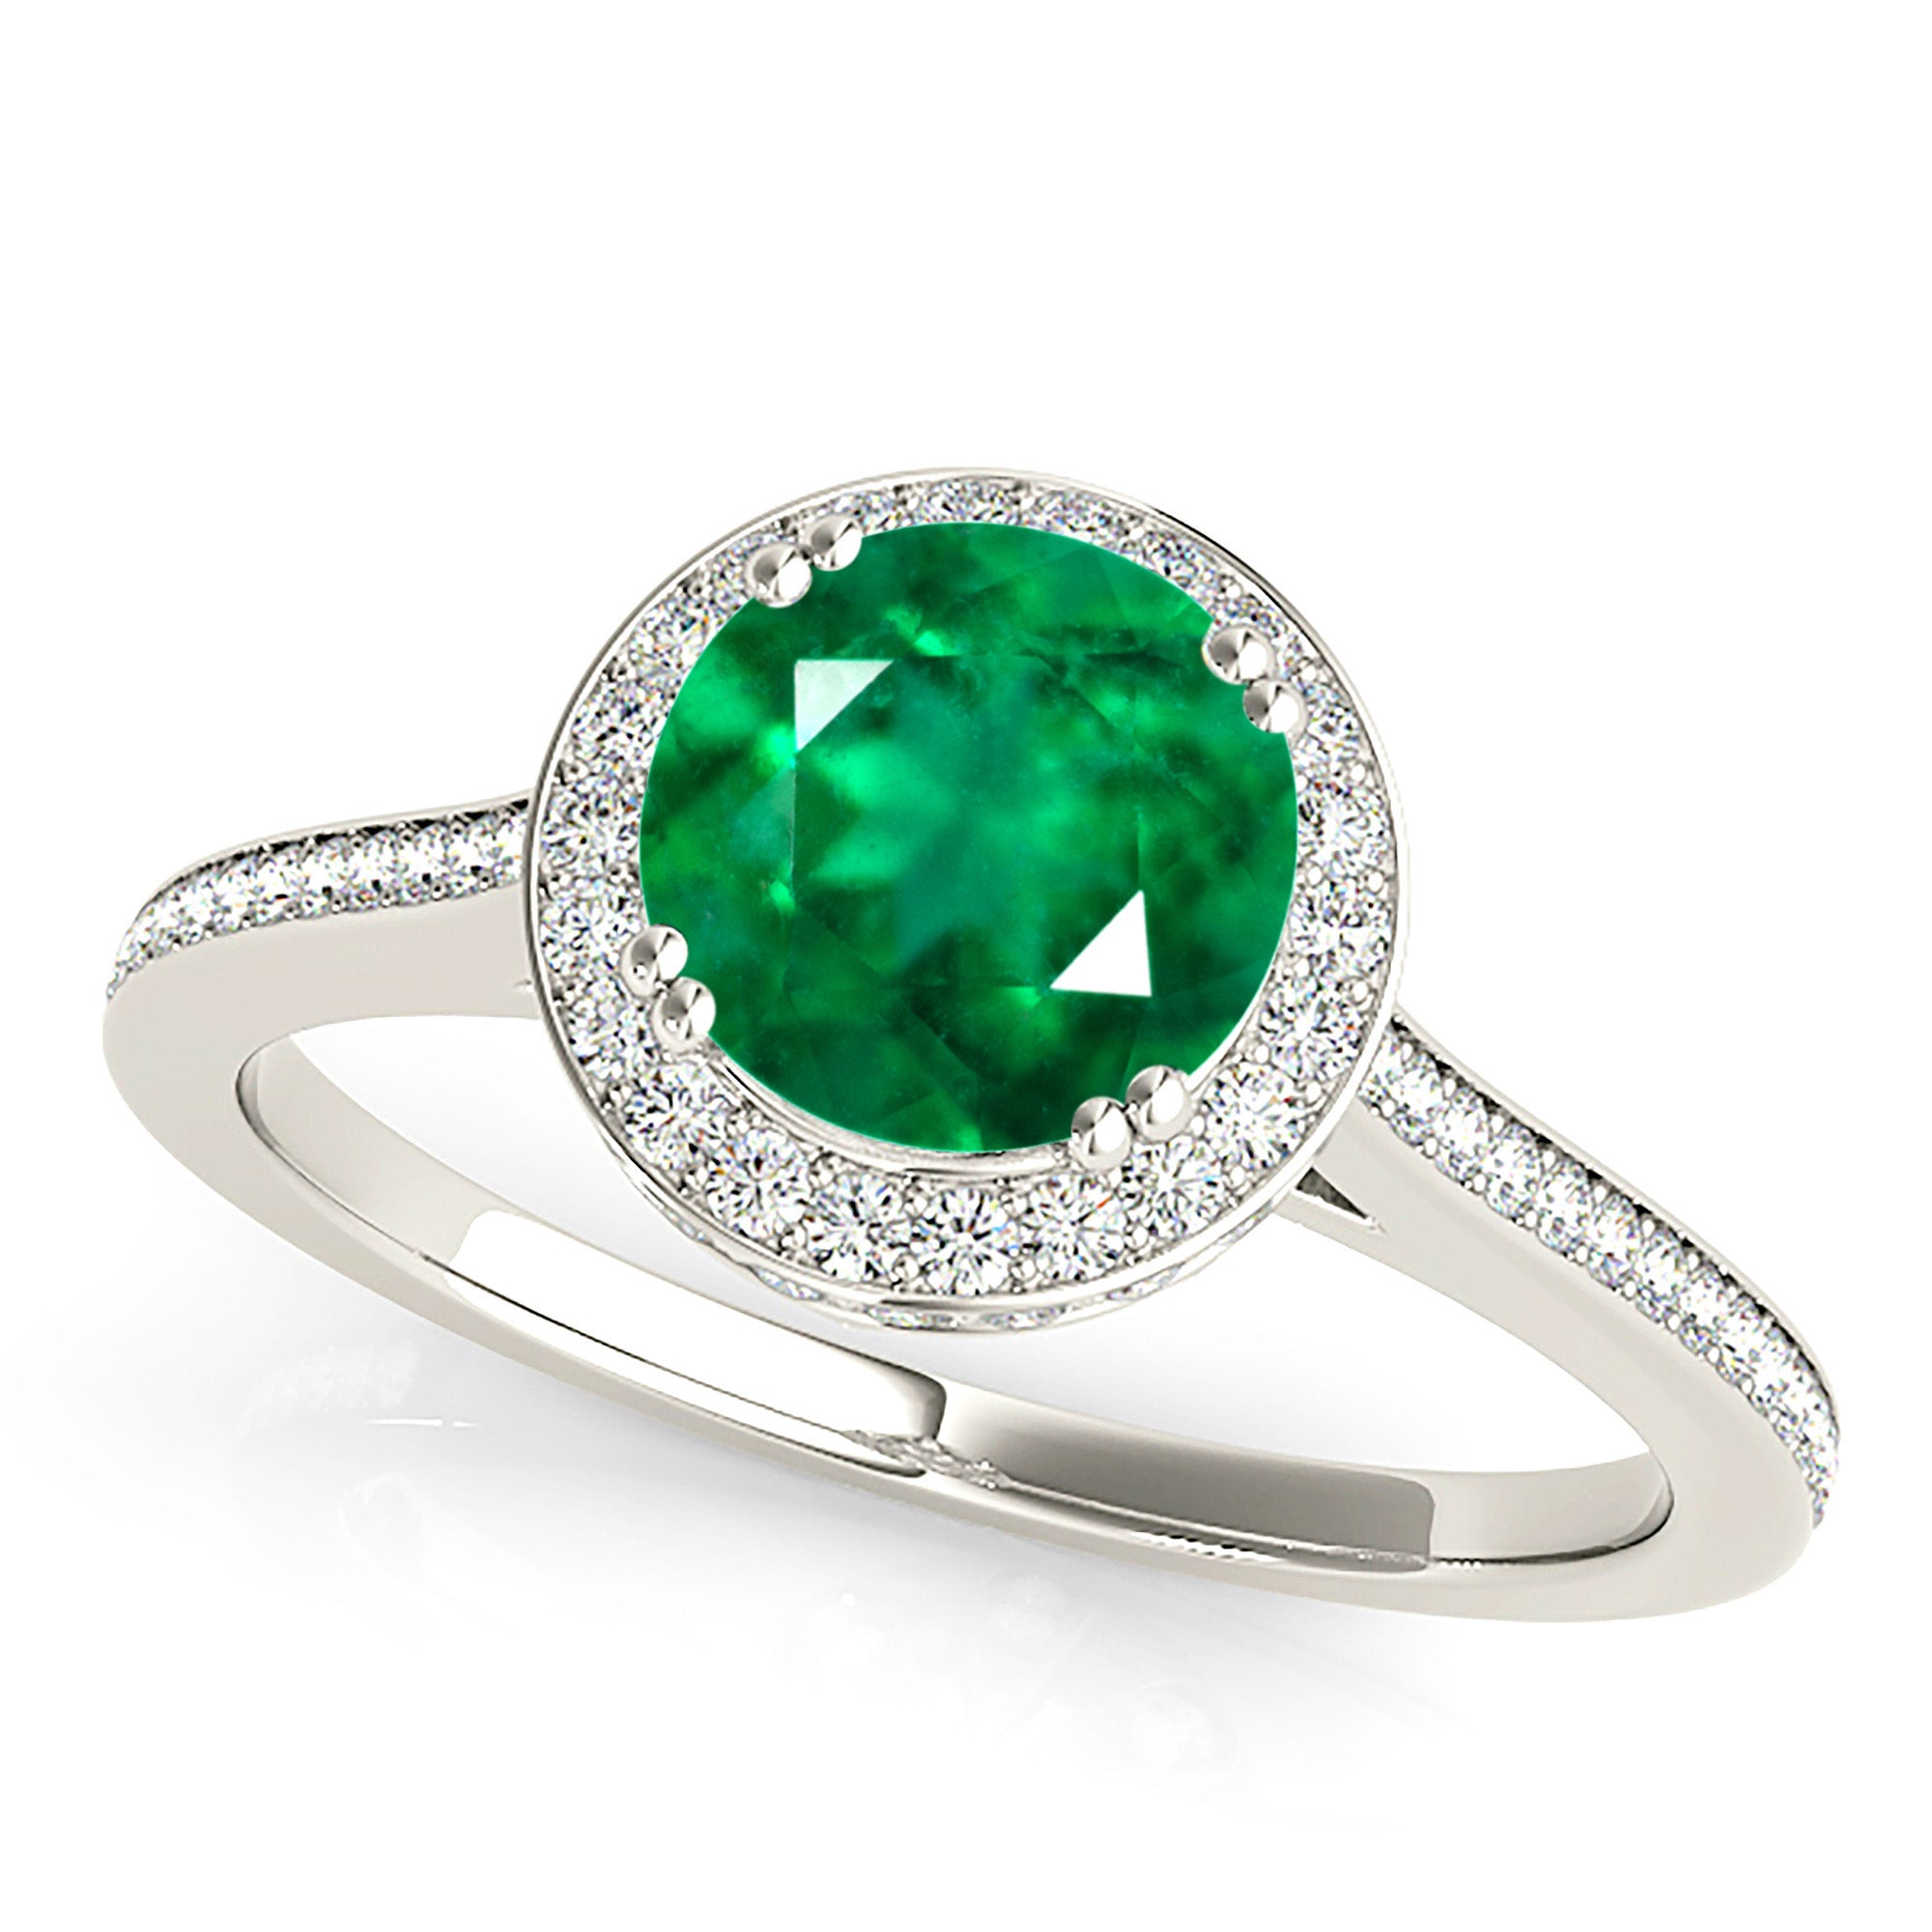 2.00 ct. Genuine Emerald Halo Ring With 0.50 ctw. Under Halo Side Diamonds-in 14K/18K White, Yellow, Rose Gold and Platinum - Christmas Jewelry Gift -VIRABYANI